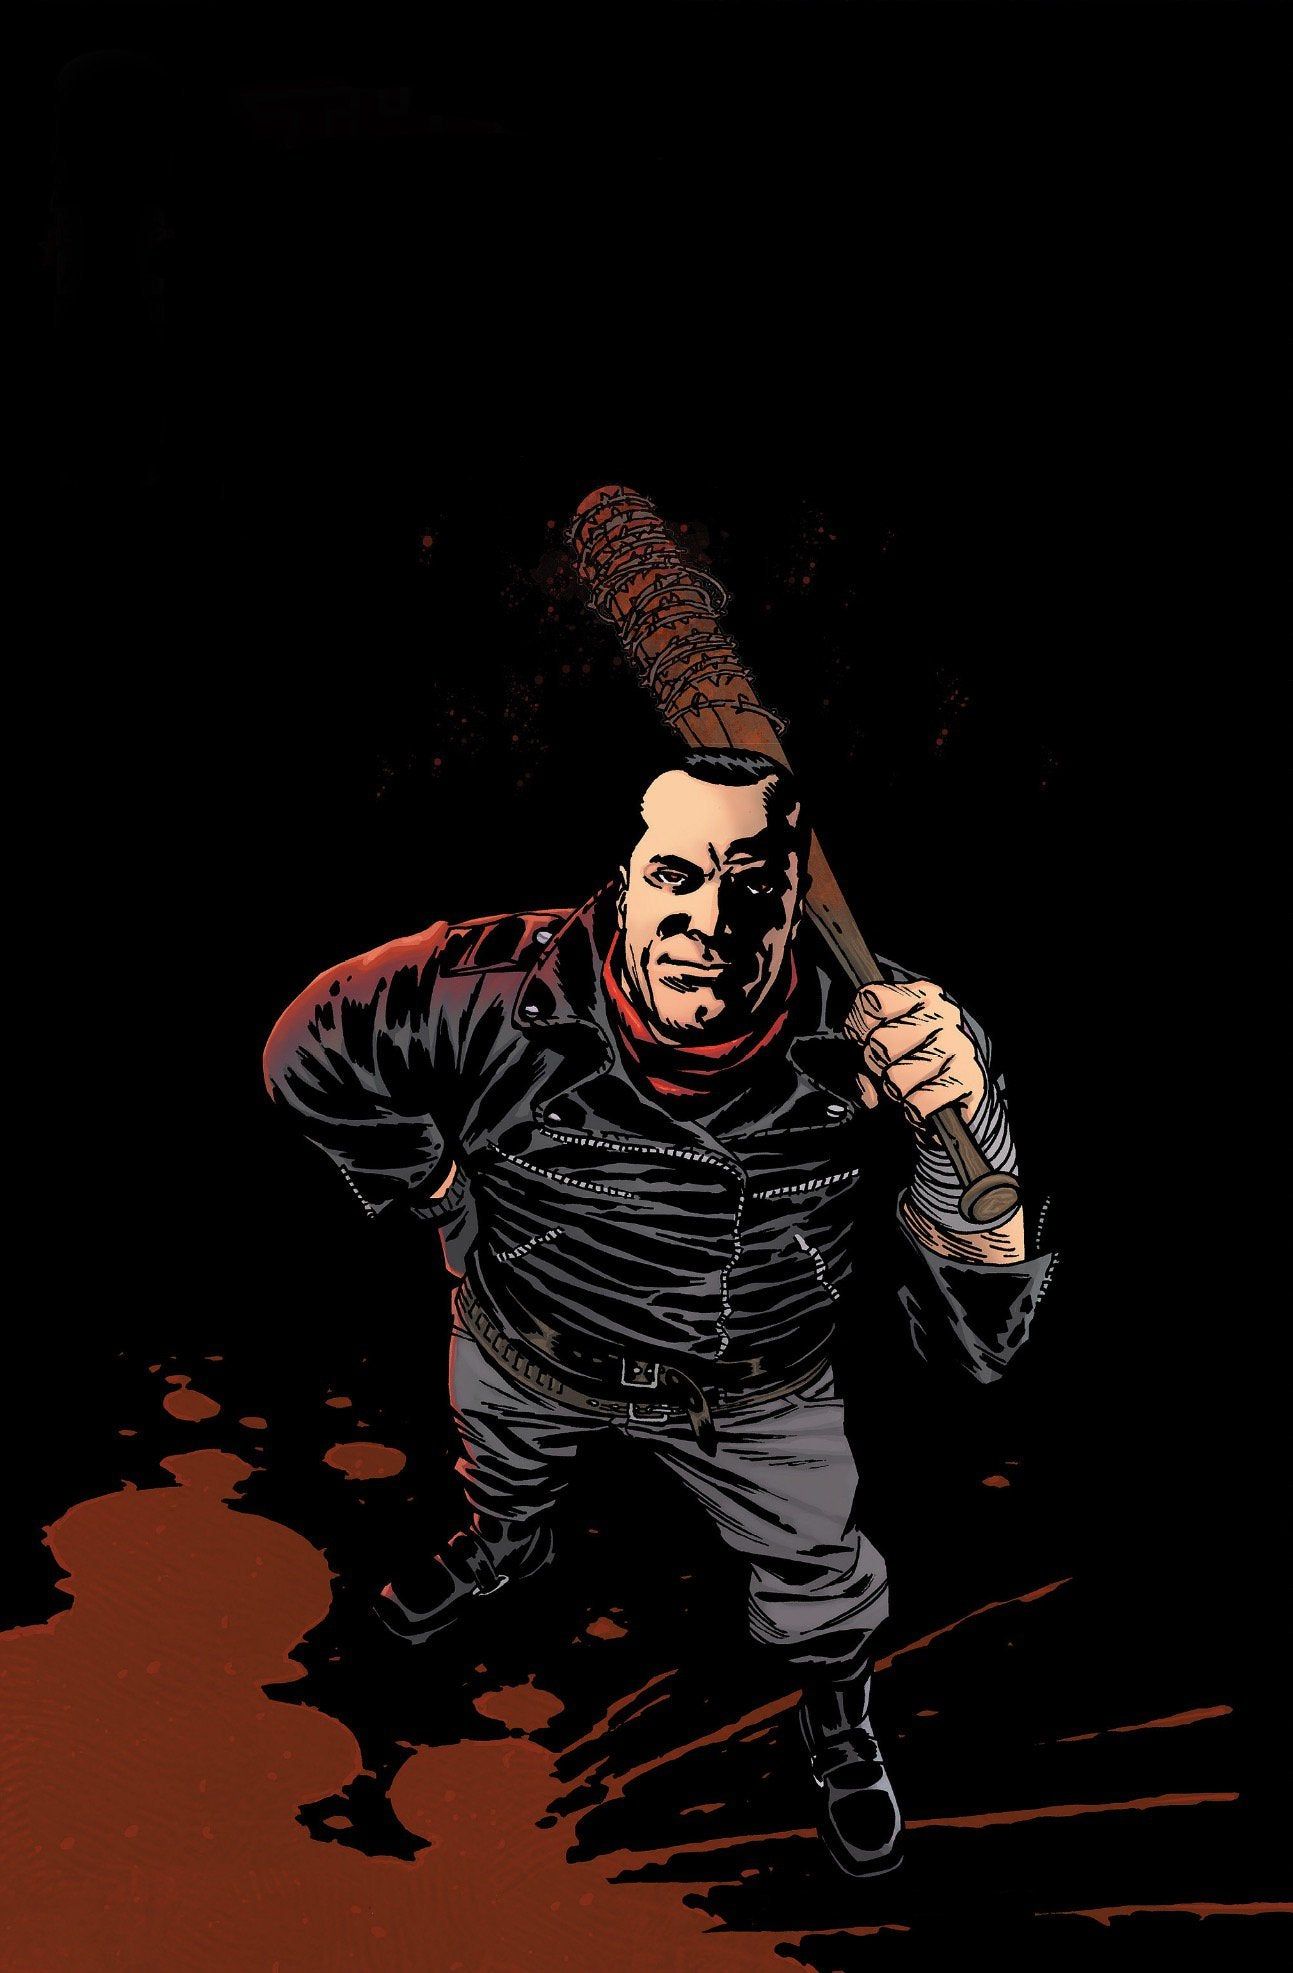 With a little editing I made a phone wallpaper of Negan from the comic cover. Hope you guys like it!